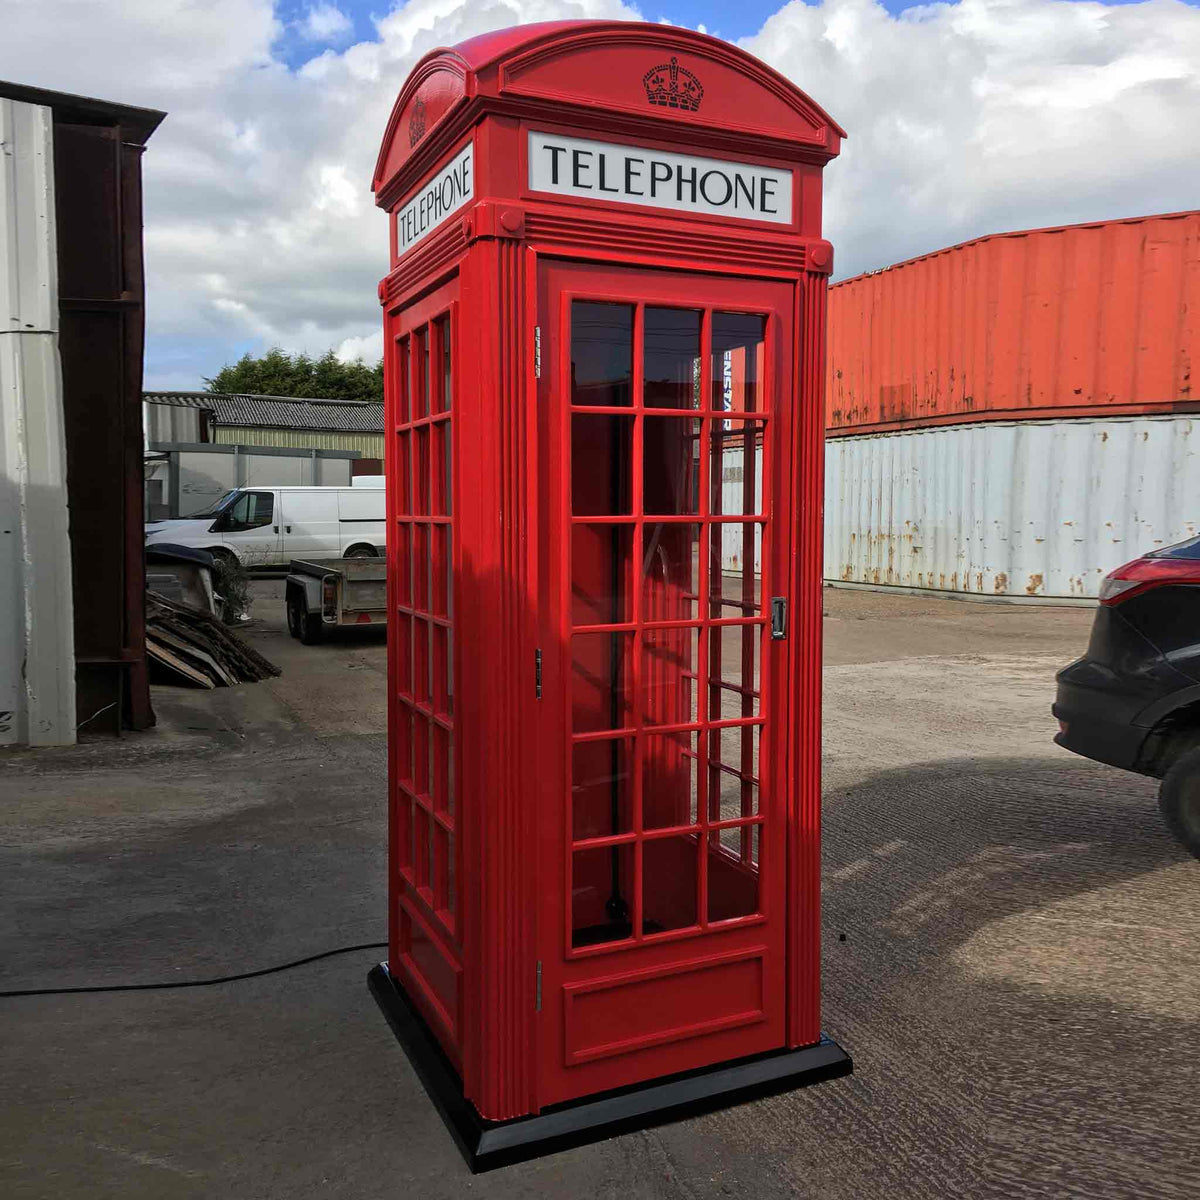 K2 British Red Telephone Box Kiosks - Original Phonebox Red Paint colour - Replica handcrafted boxes - Uk Built Phoneboxes - Warden&#39;s Crafts &amp; Creations